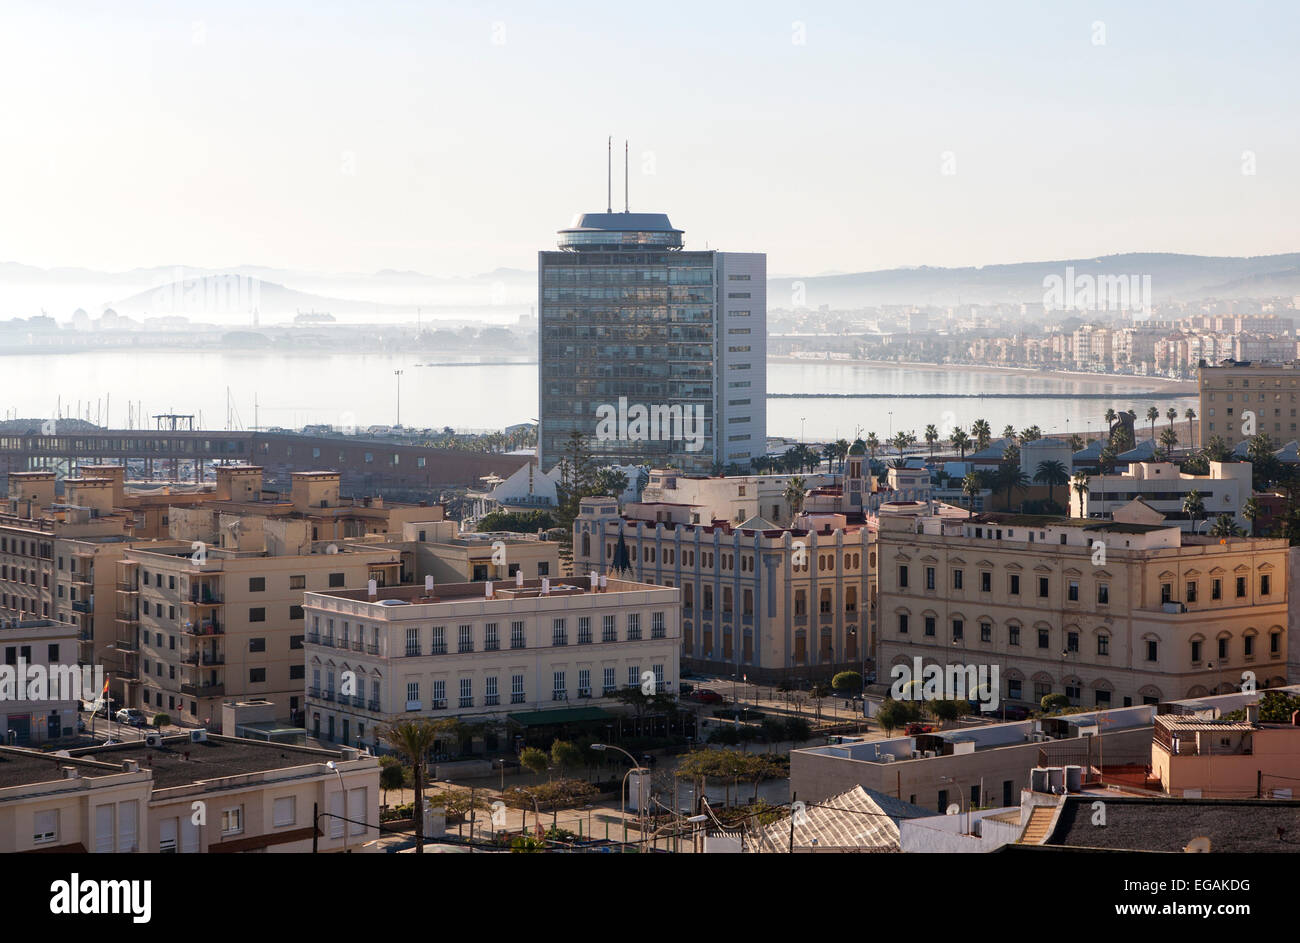 Morning view over the city Melilla autonomous city state Spanish territory in north Africa, Spain Stock Photo